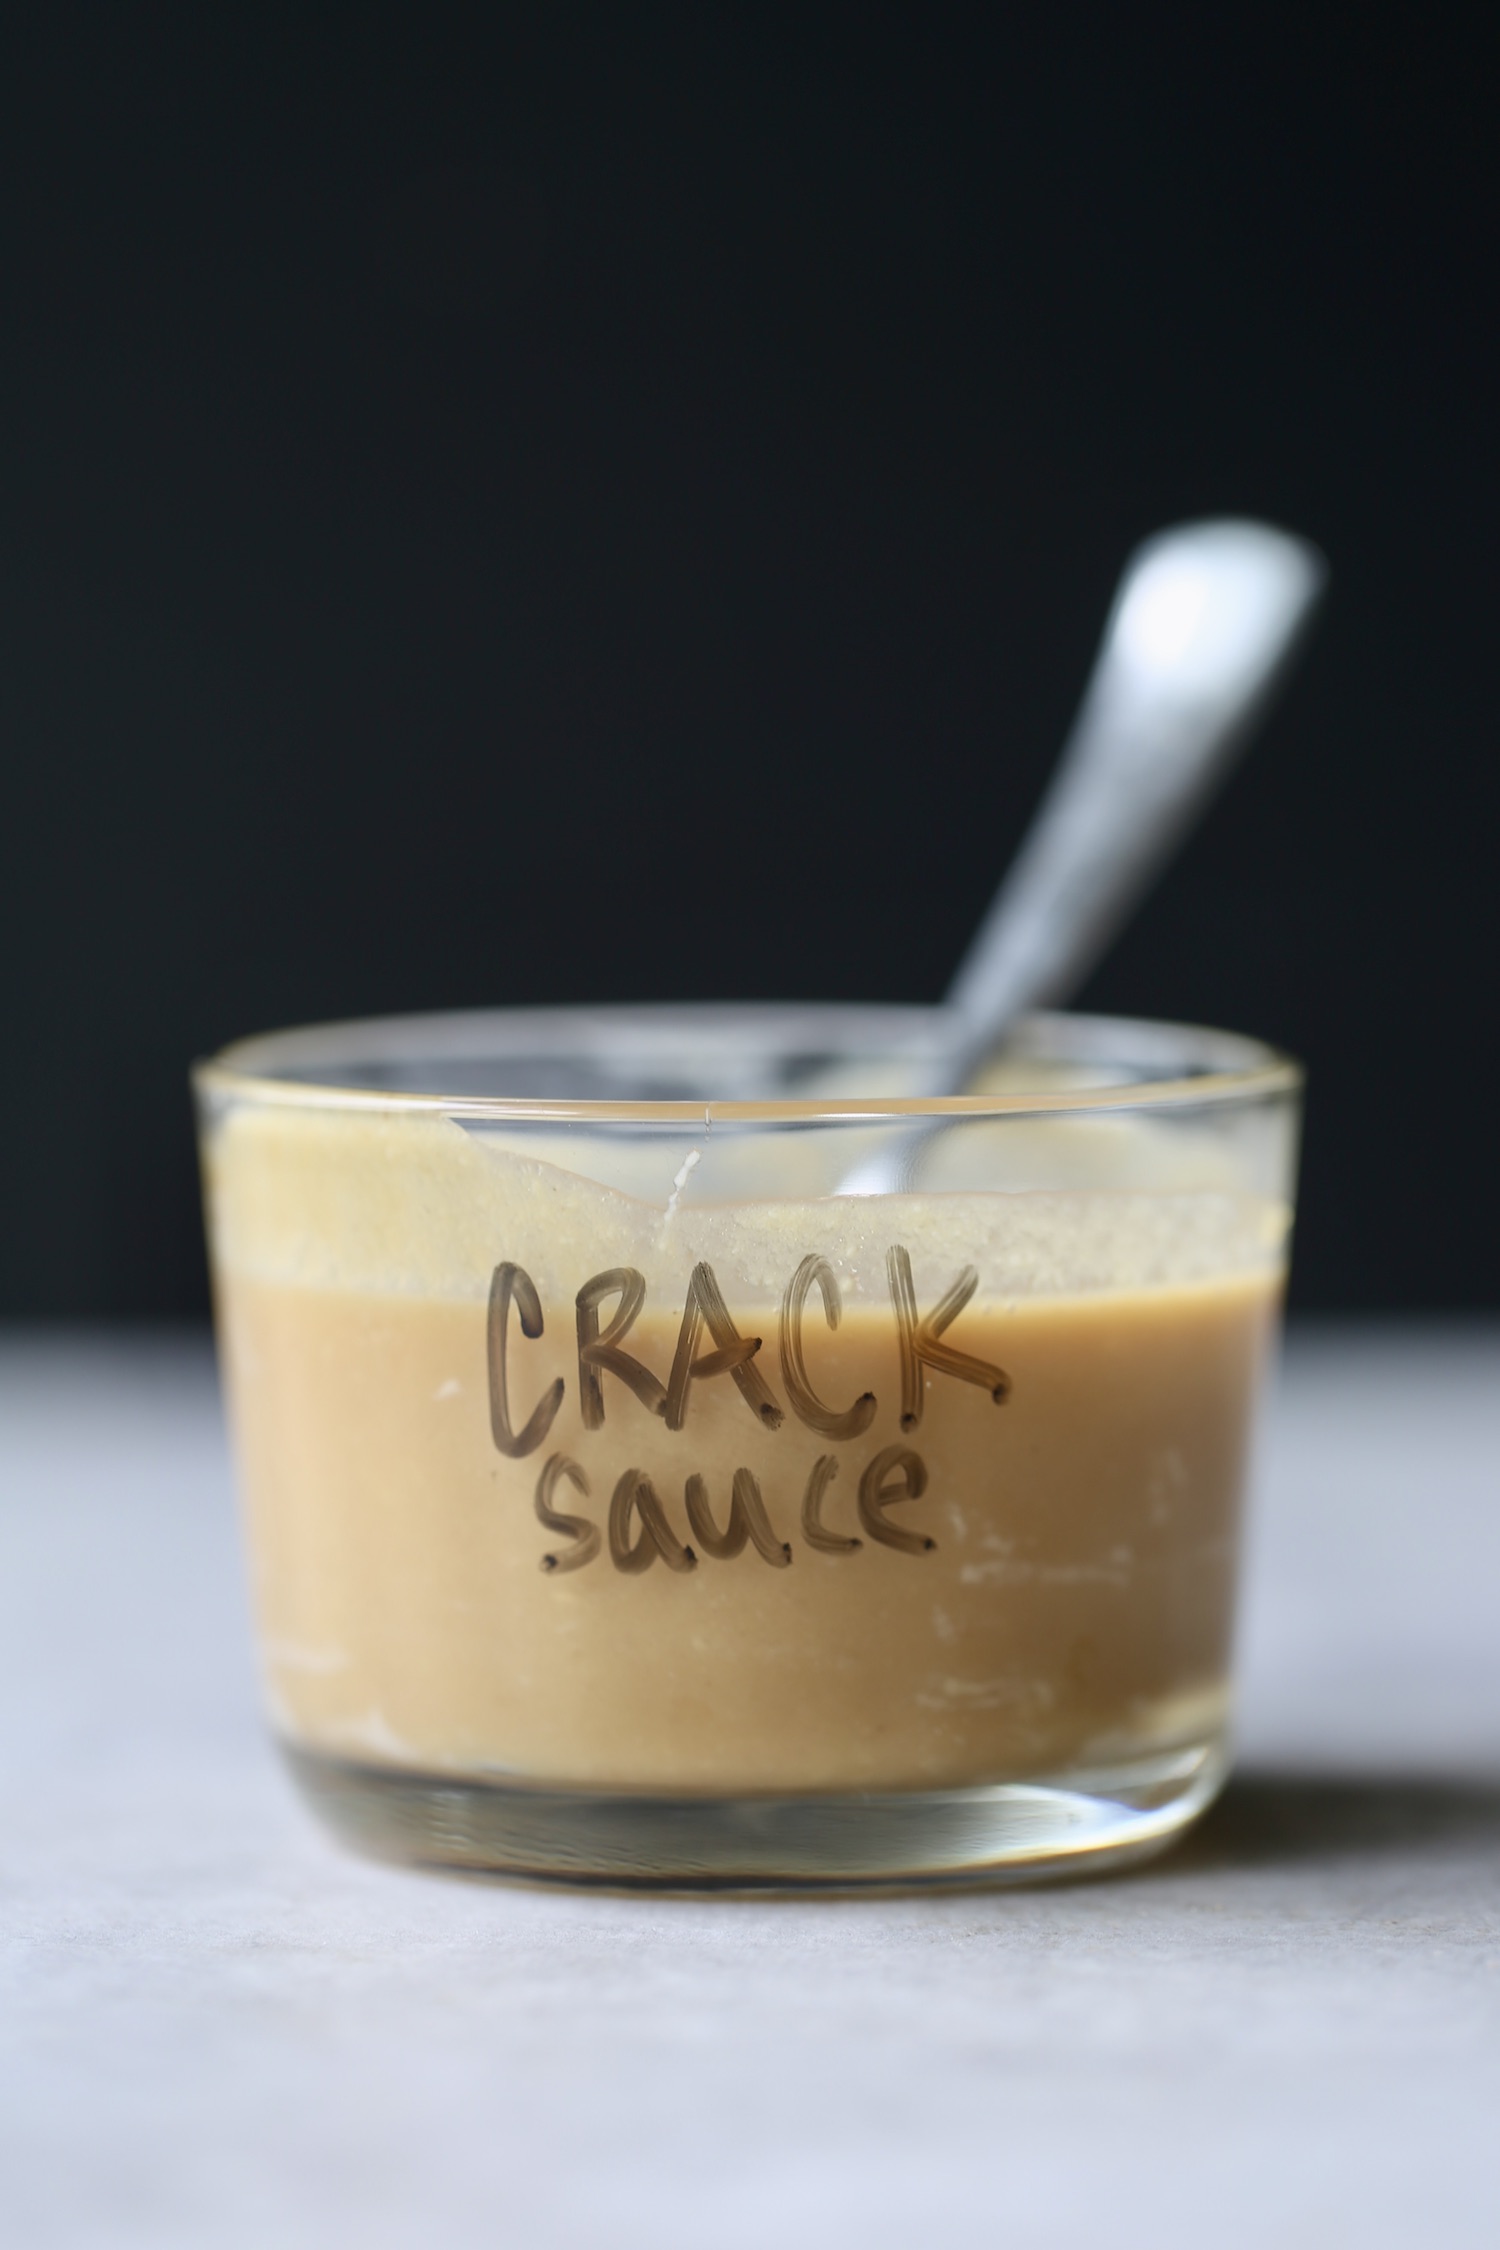 with a glass bowl "Crack Sauce" Written with white board marker on the front. 